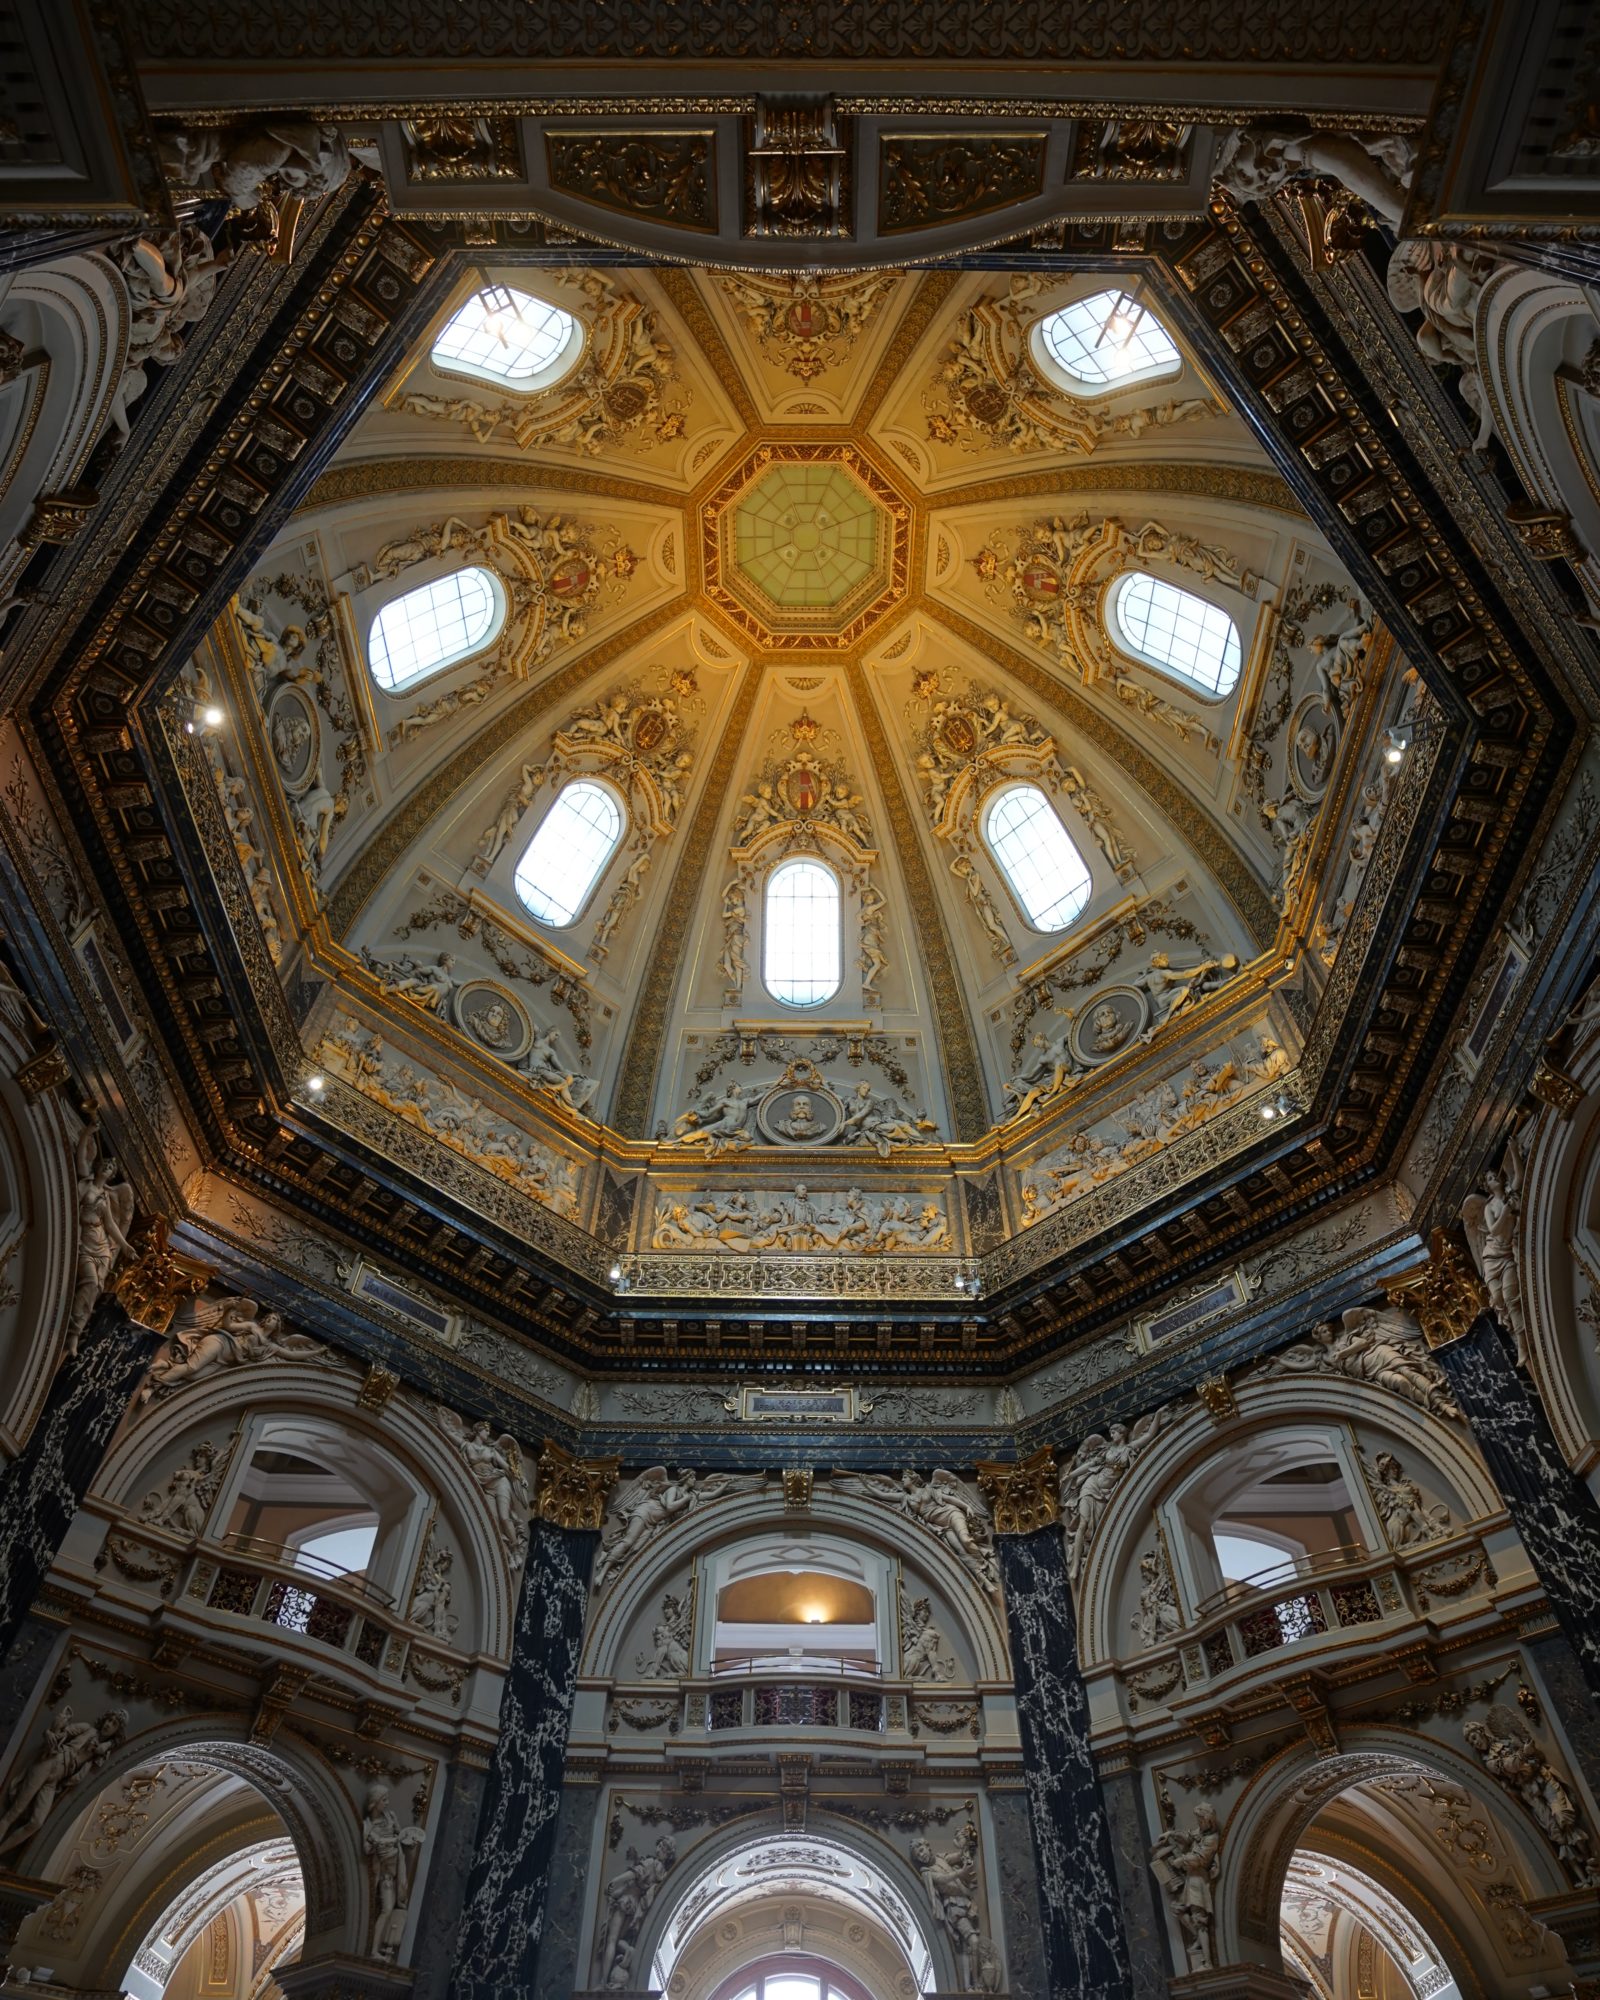 Elaborately decorated dome over the second floor